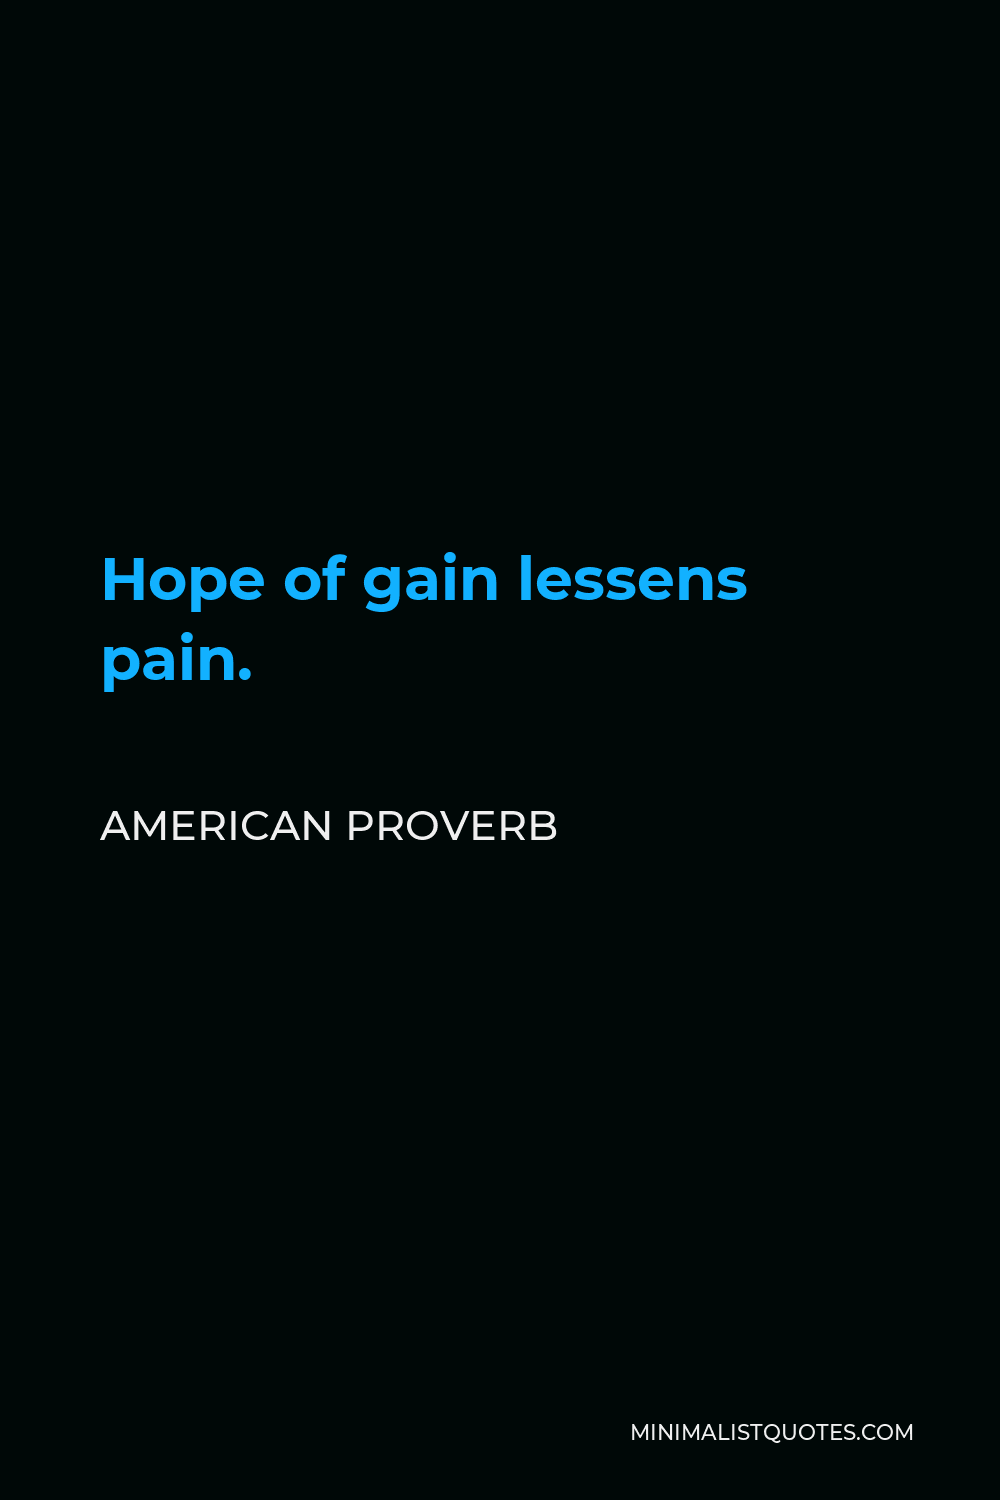 American Proverb Quote - Hope of gain lessens pain.